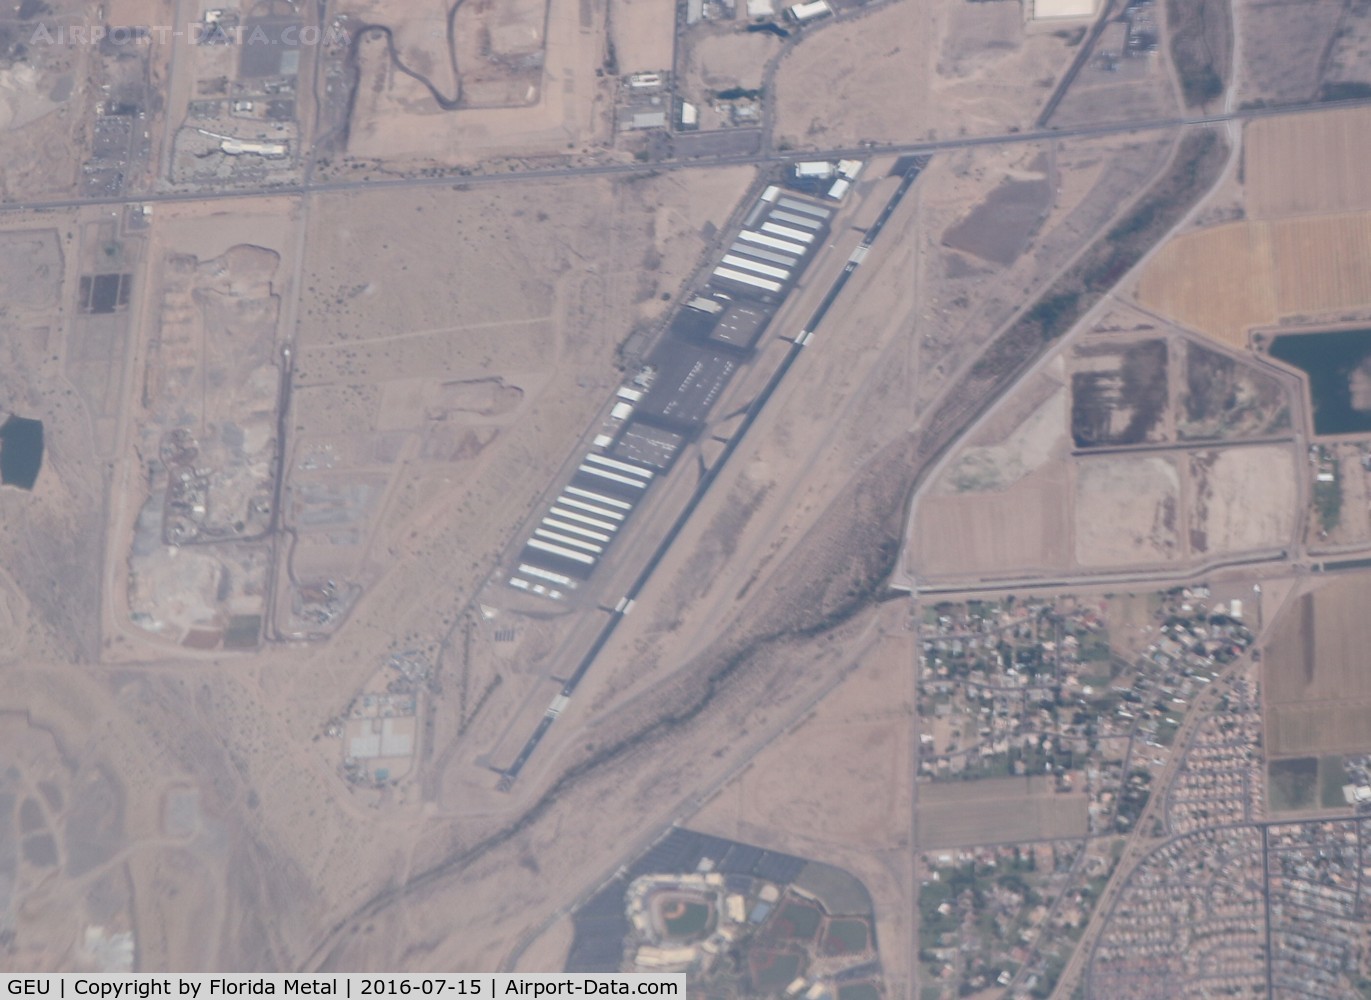 Glendale Municipal Airport (GEU) - Glendale Airport from the air